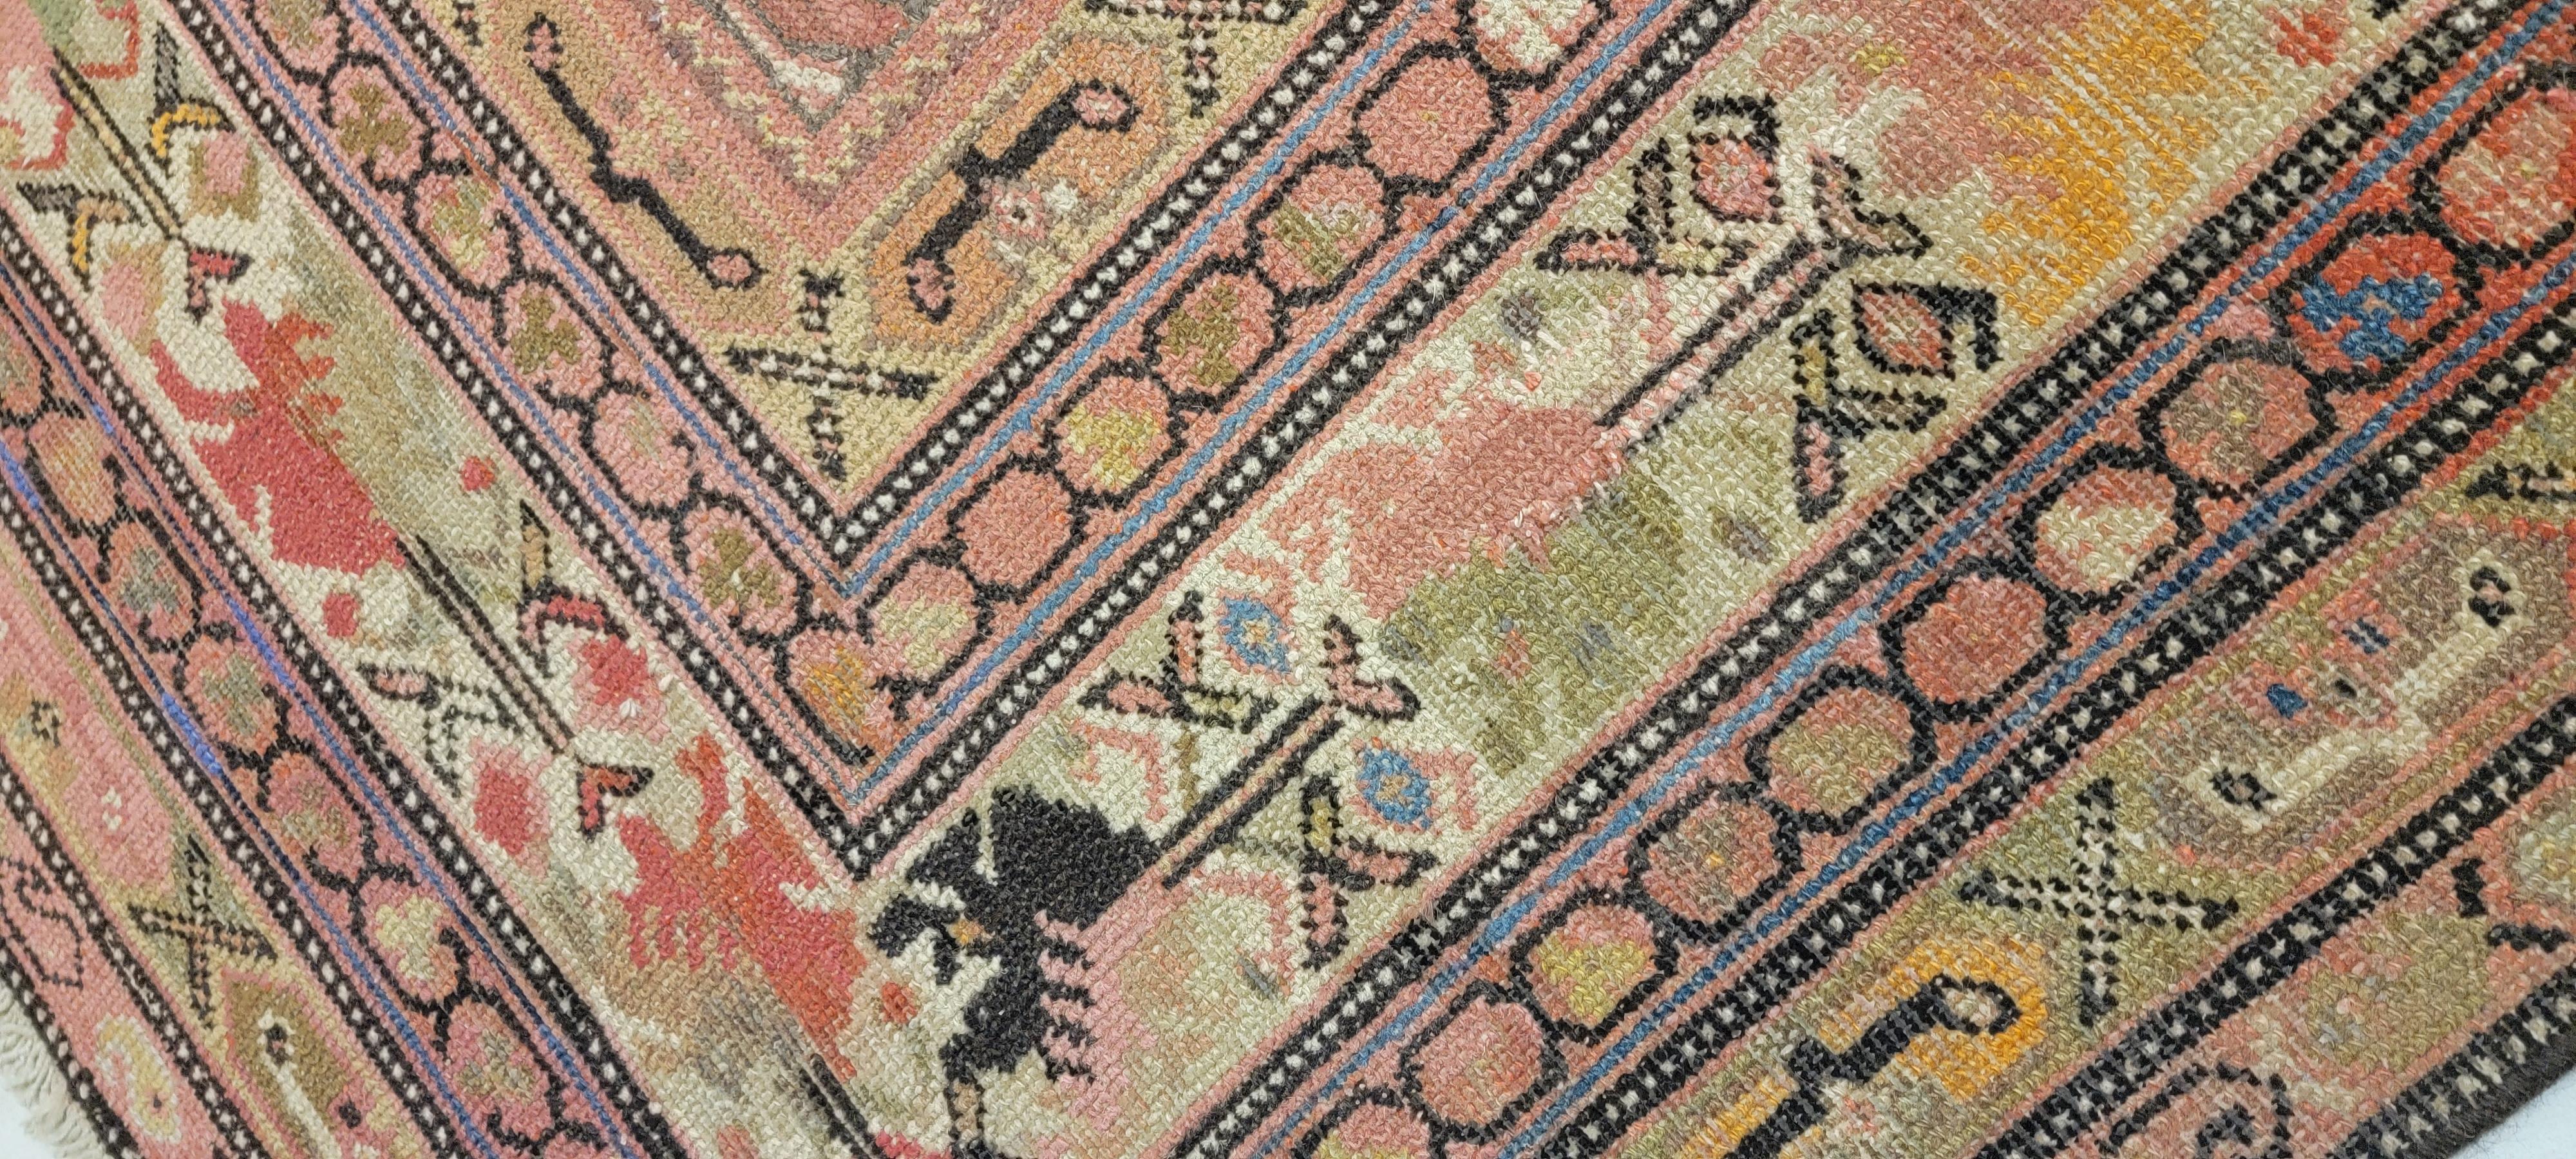 Early 20th Century Antique Persian/Kurdish Malayer Rug For Sale 2